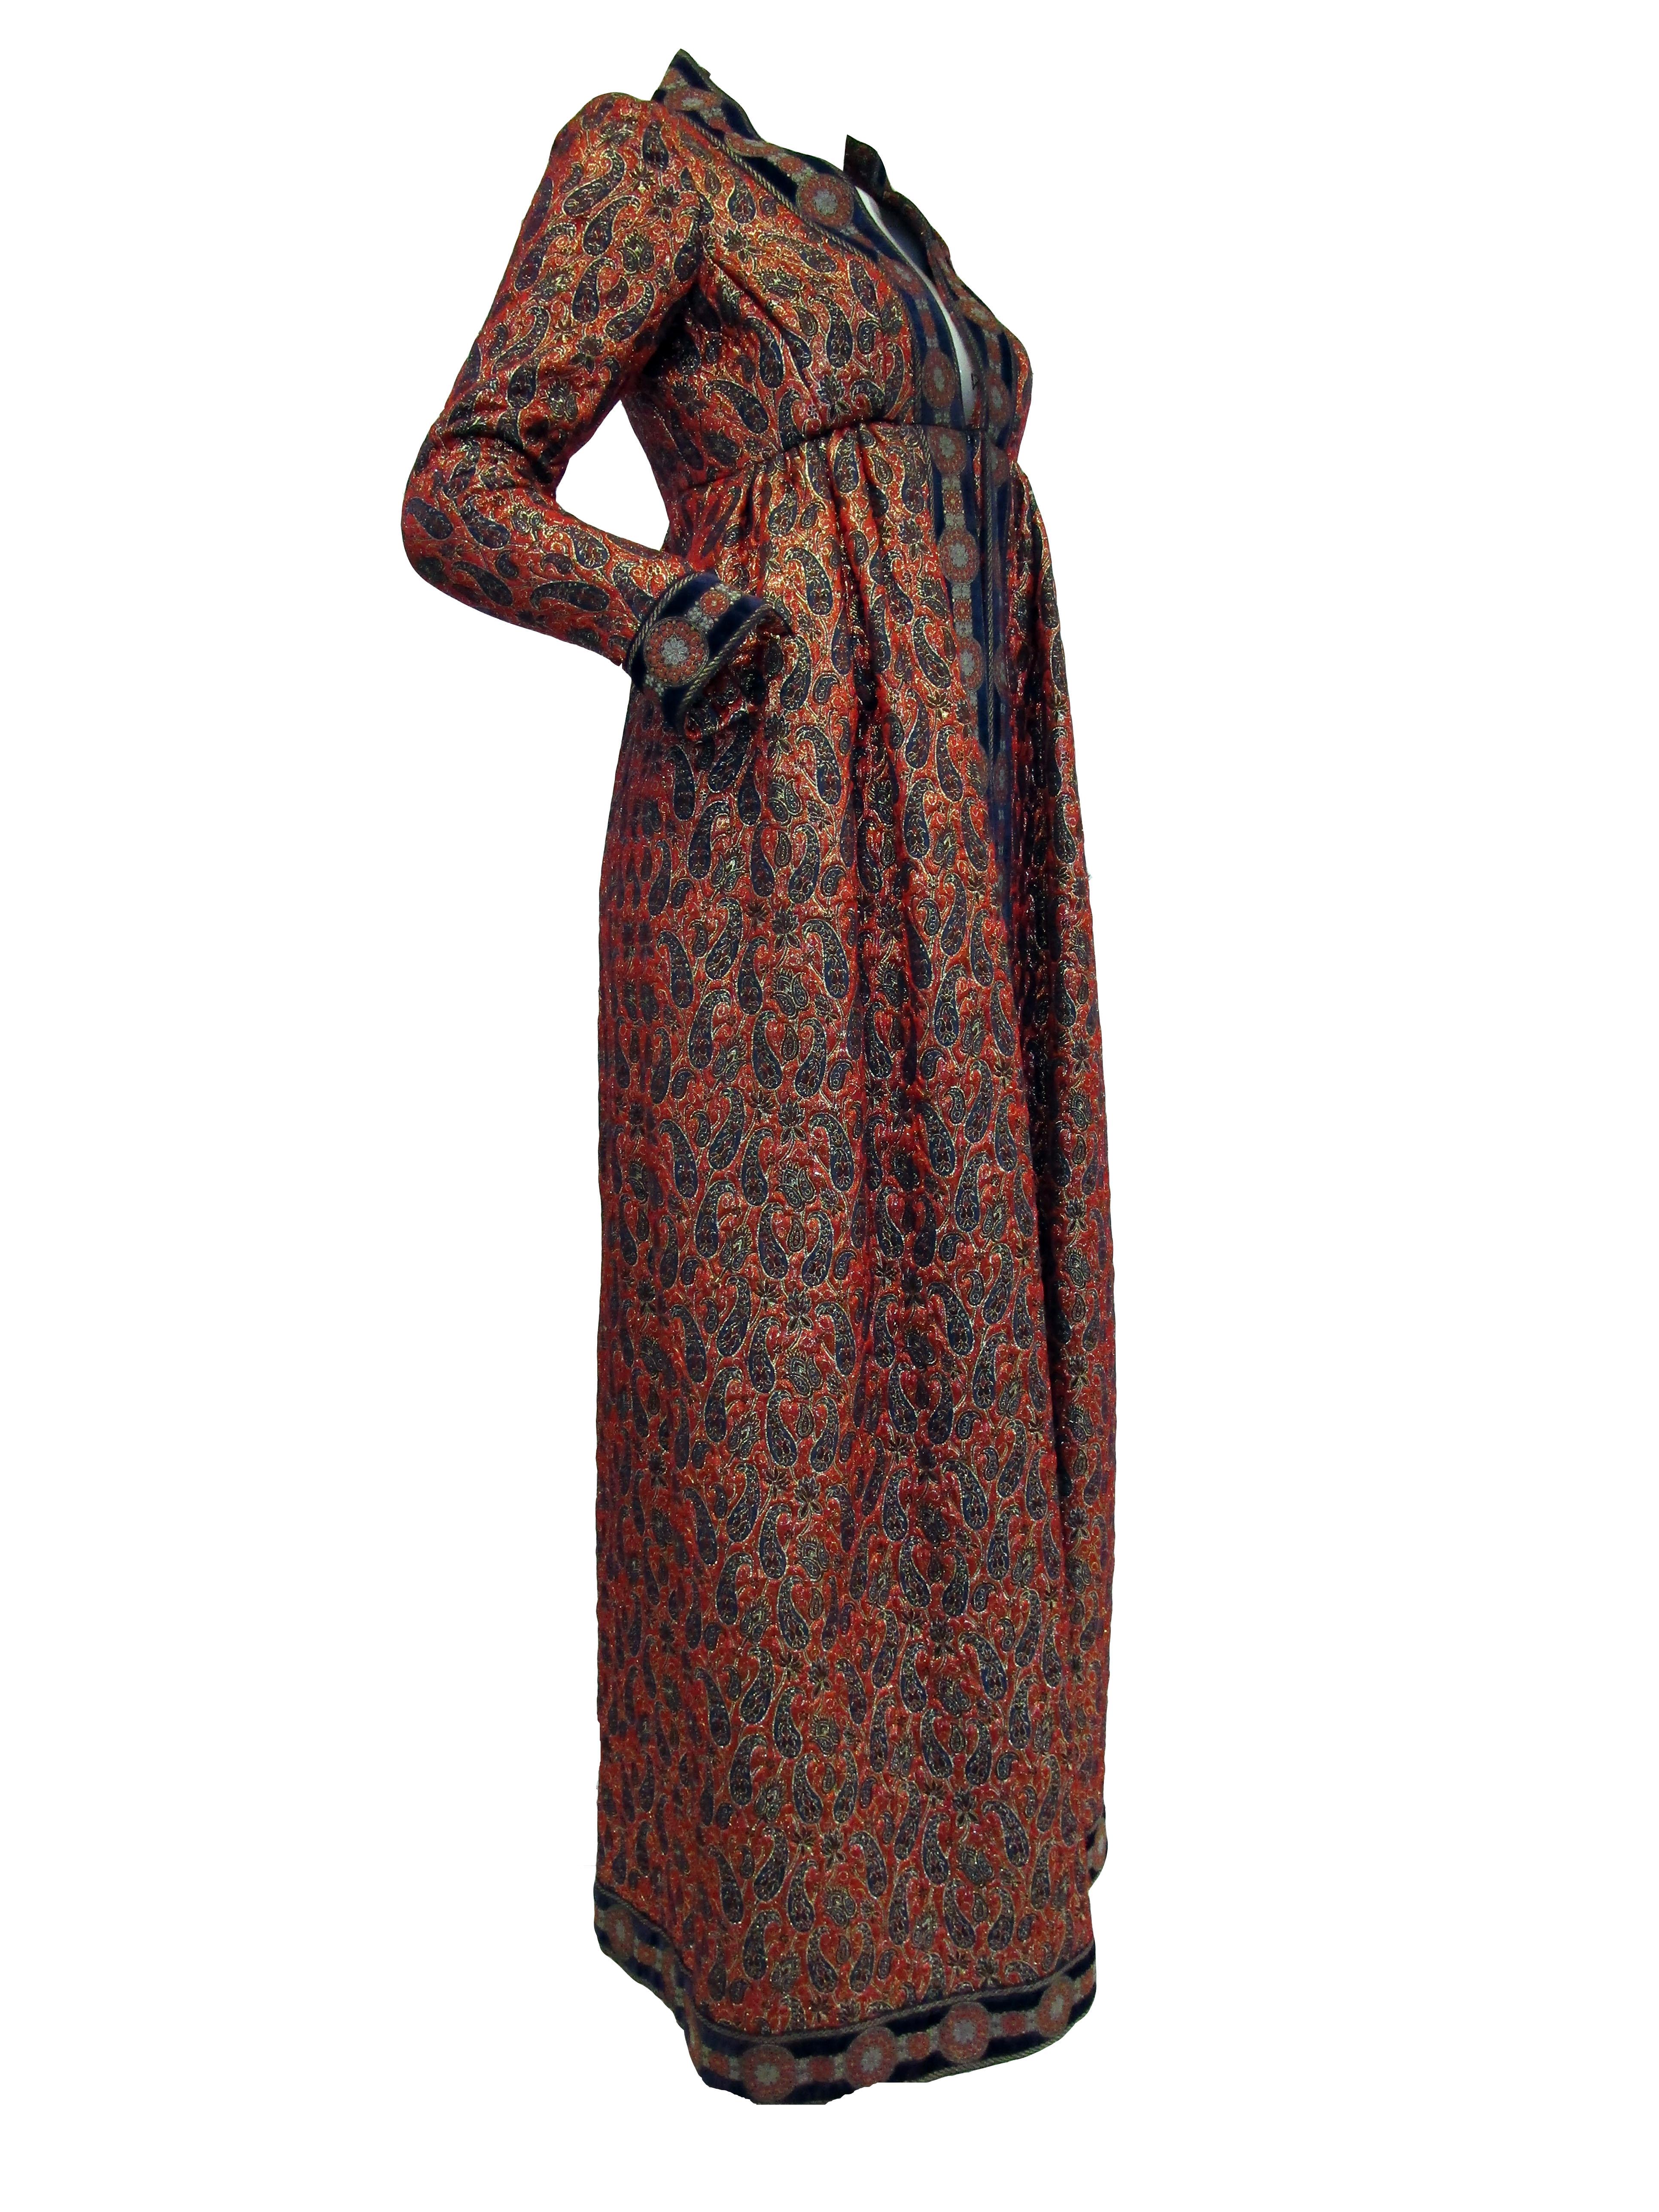 1960s Geoffery Beene Red Purple and Gold Brocade Evening Dress In Excellent Condition For Sale In Houston, TX